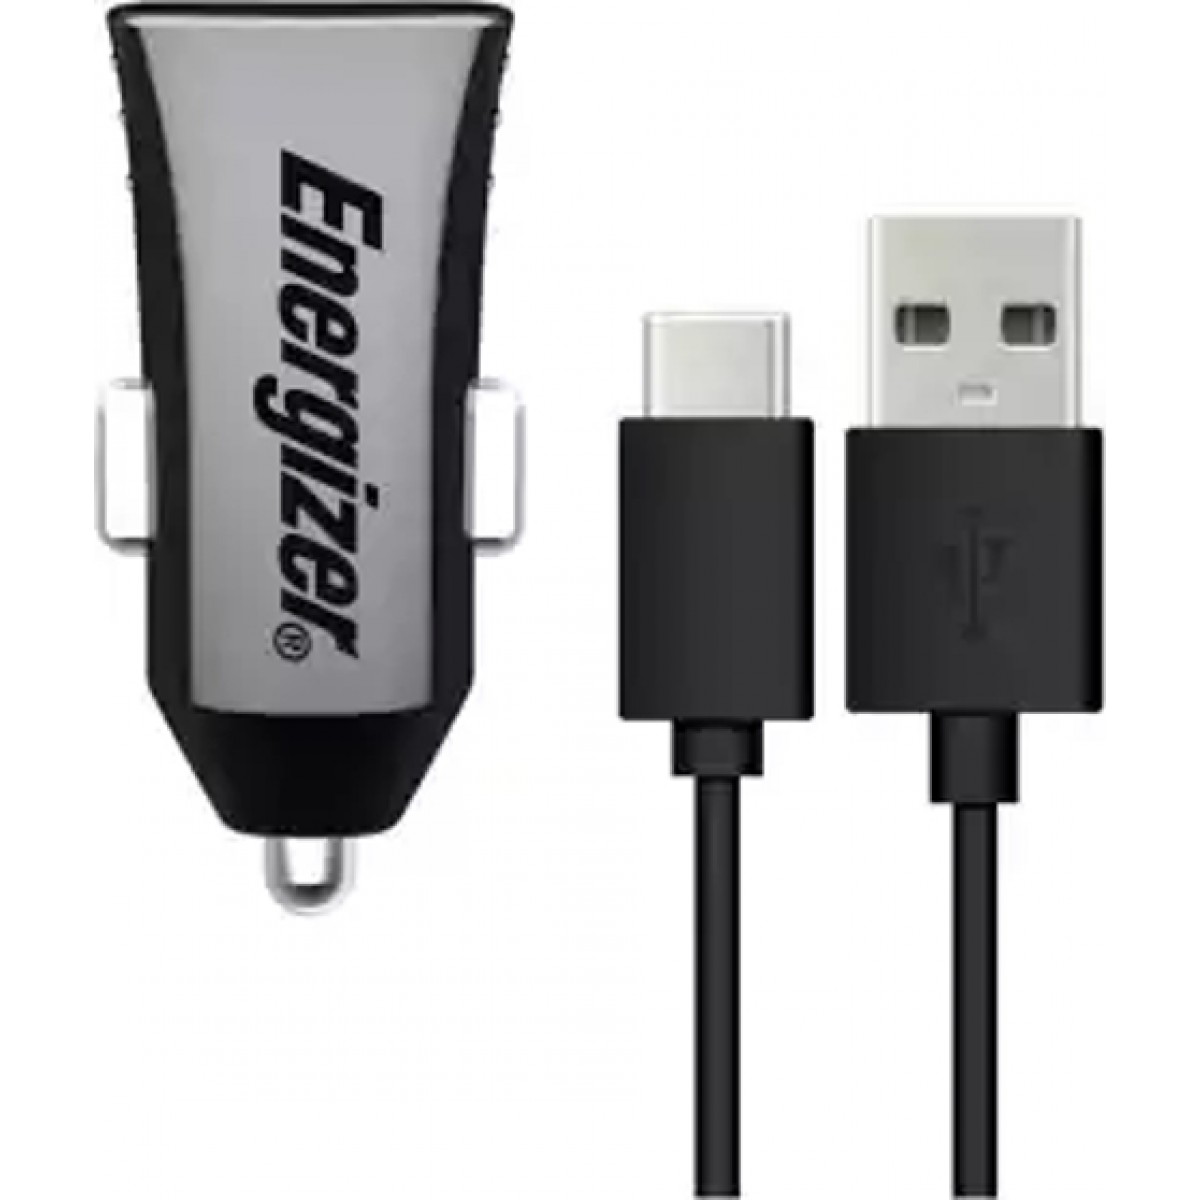 ENERGIZER CAR FAST CHARGER 18W 1 USB-C / 2 USB + USB-C 2.0 CABLE (DC2IPGUCC3)